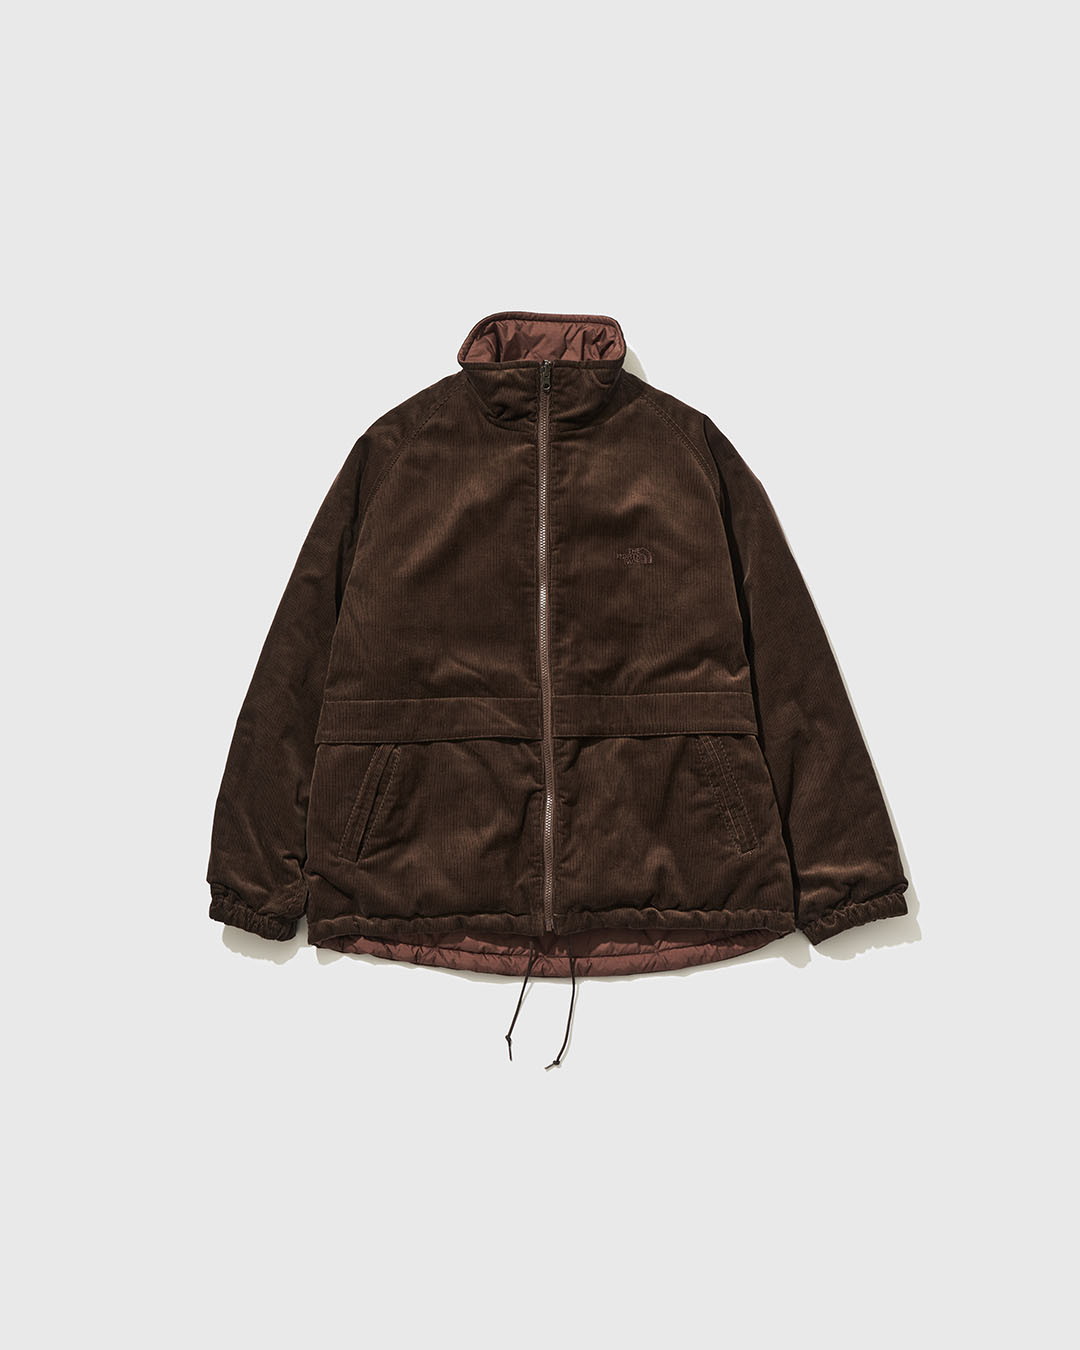 nanamica / THE NORTH FACE PURPLE LABEL / Featured Product vol.57